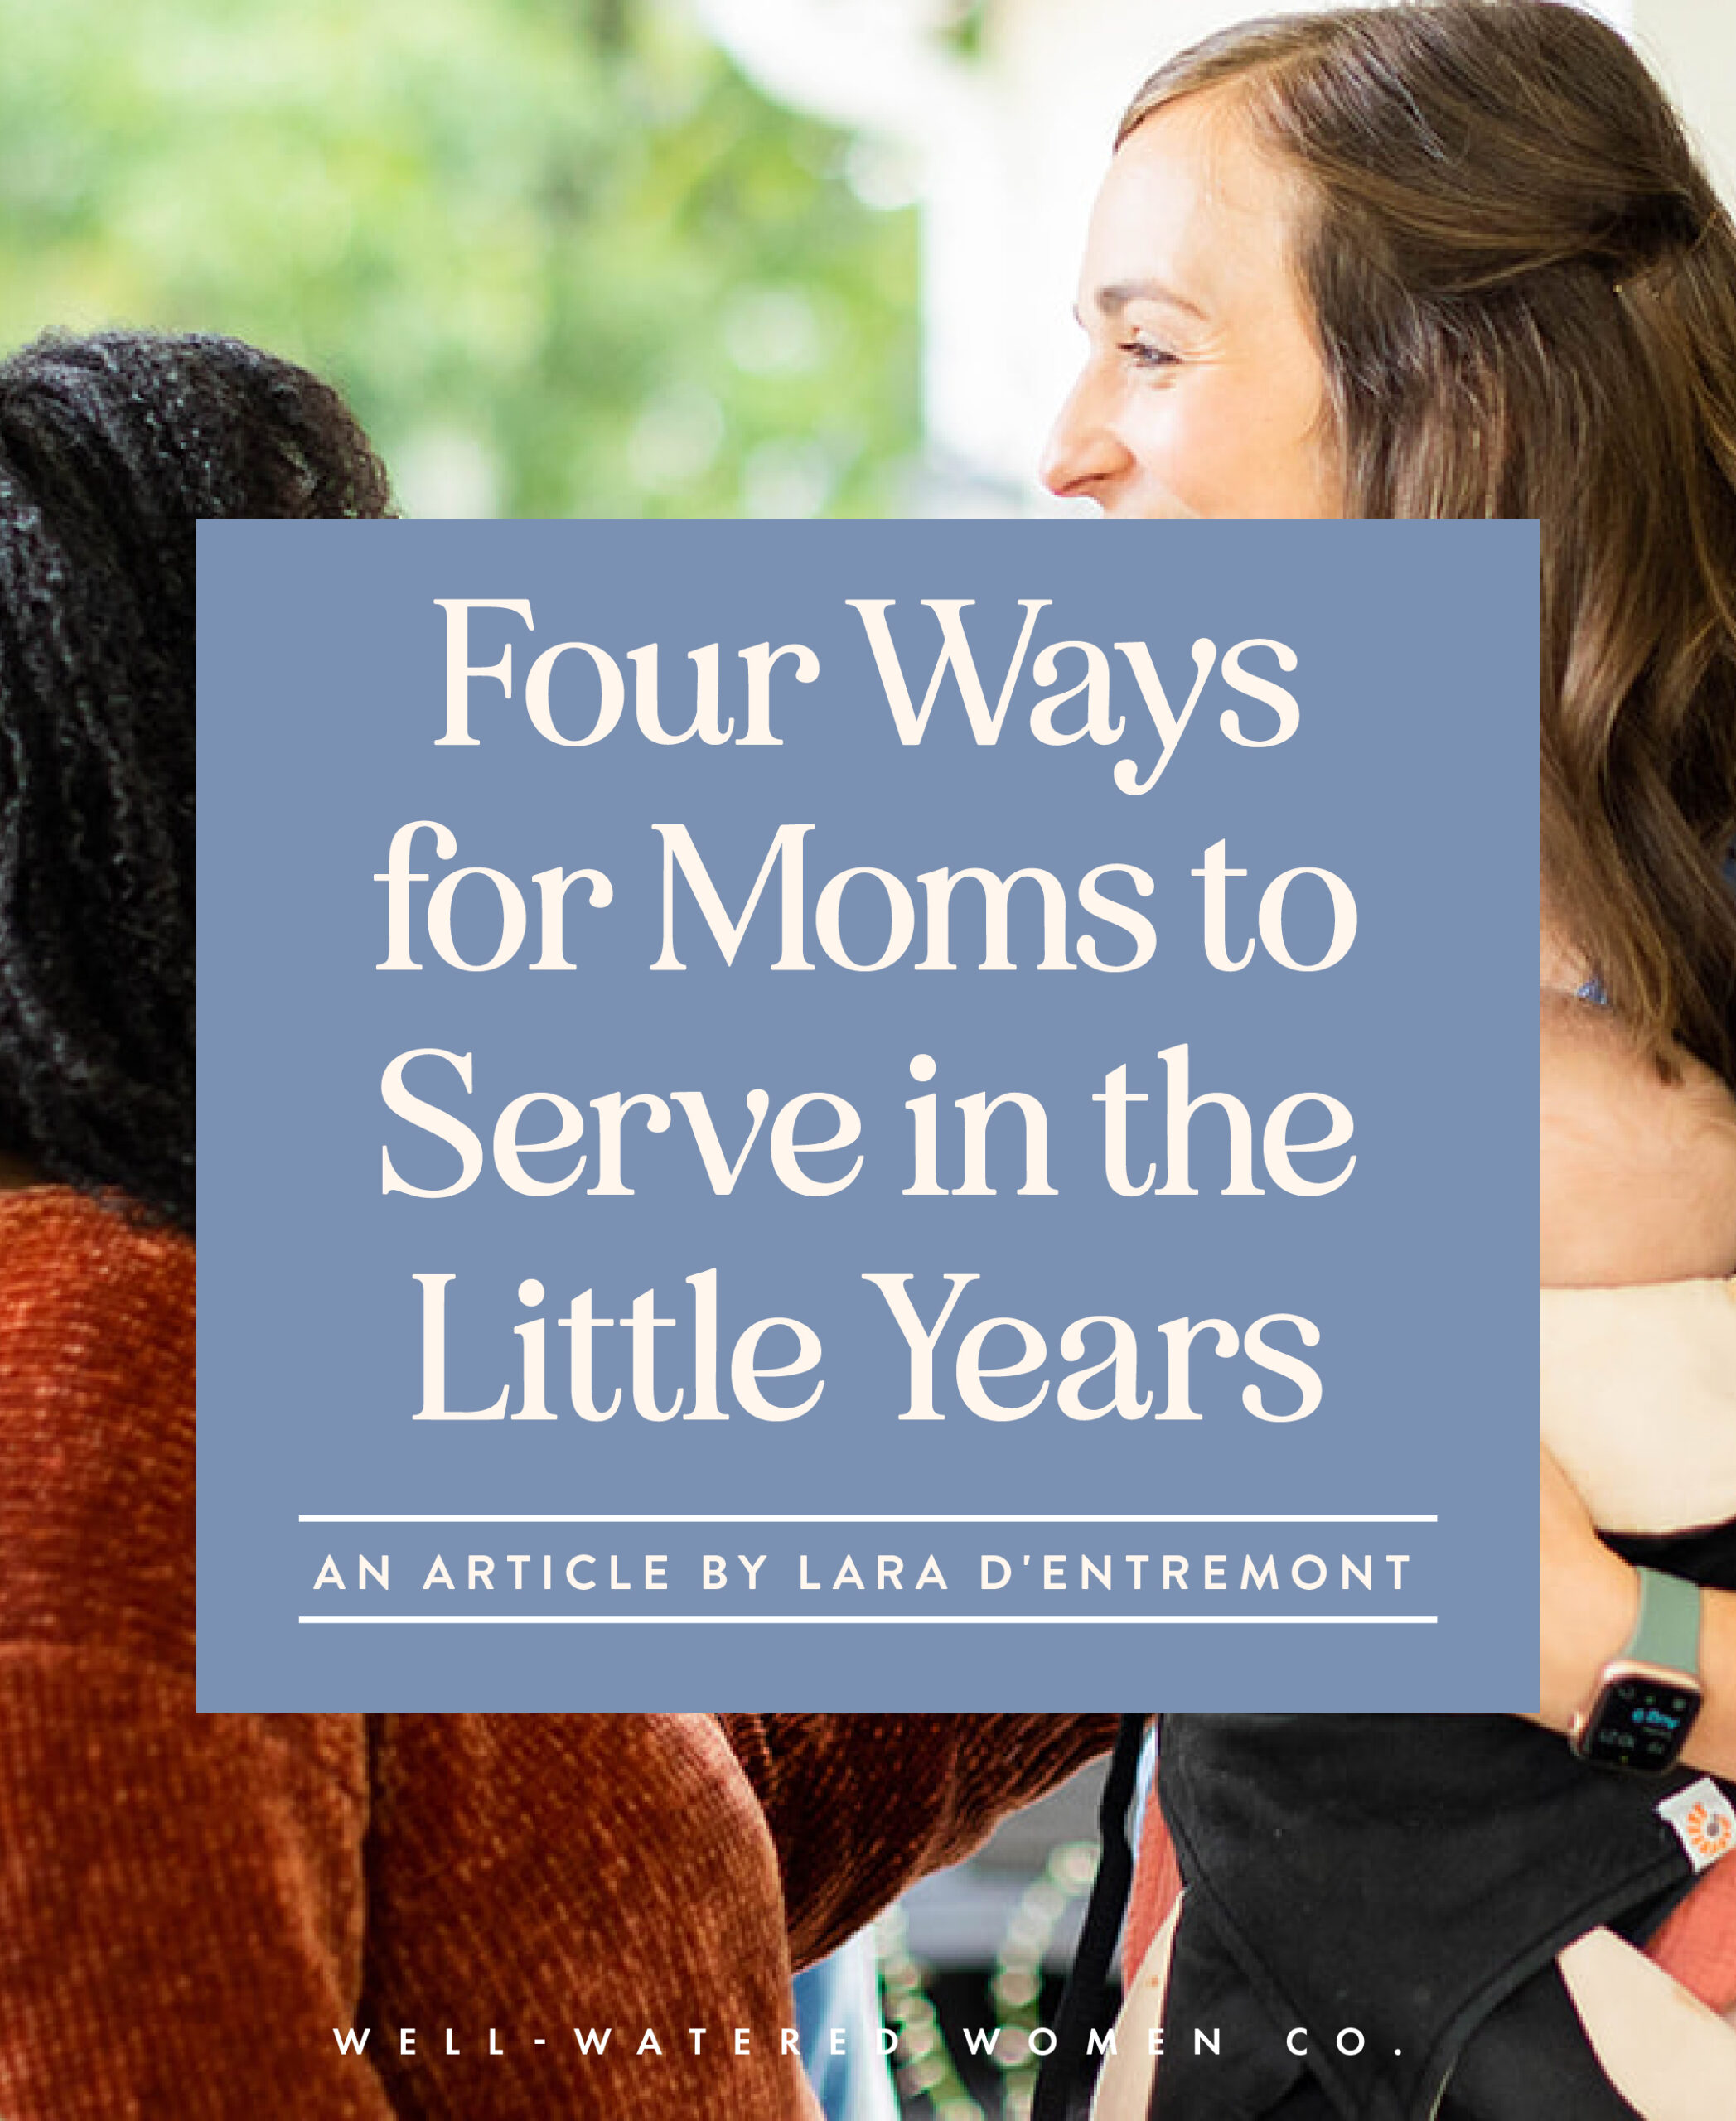 Four Ways for Moms to Serve in the Little Years - an article from Well-Watered Women